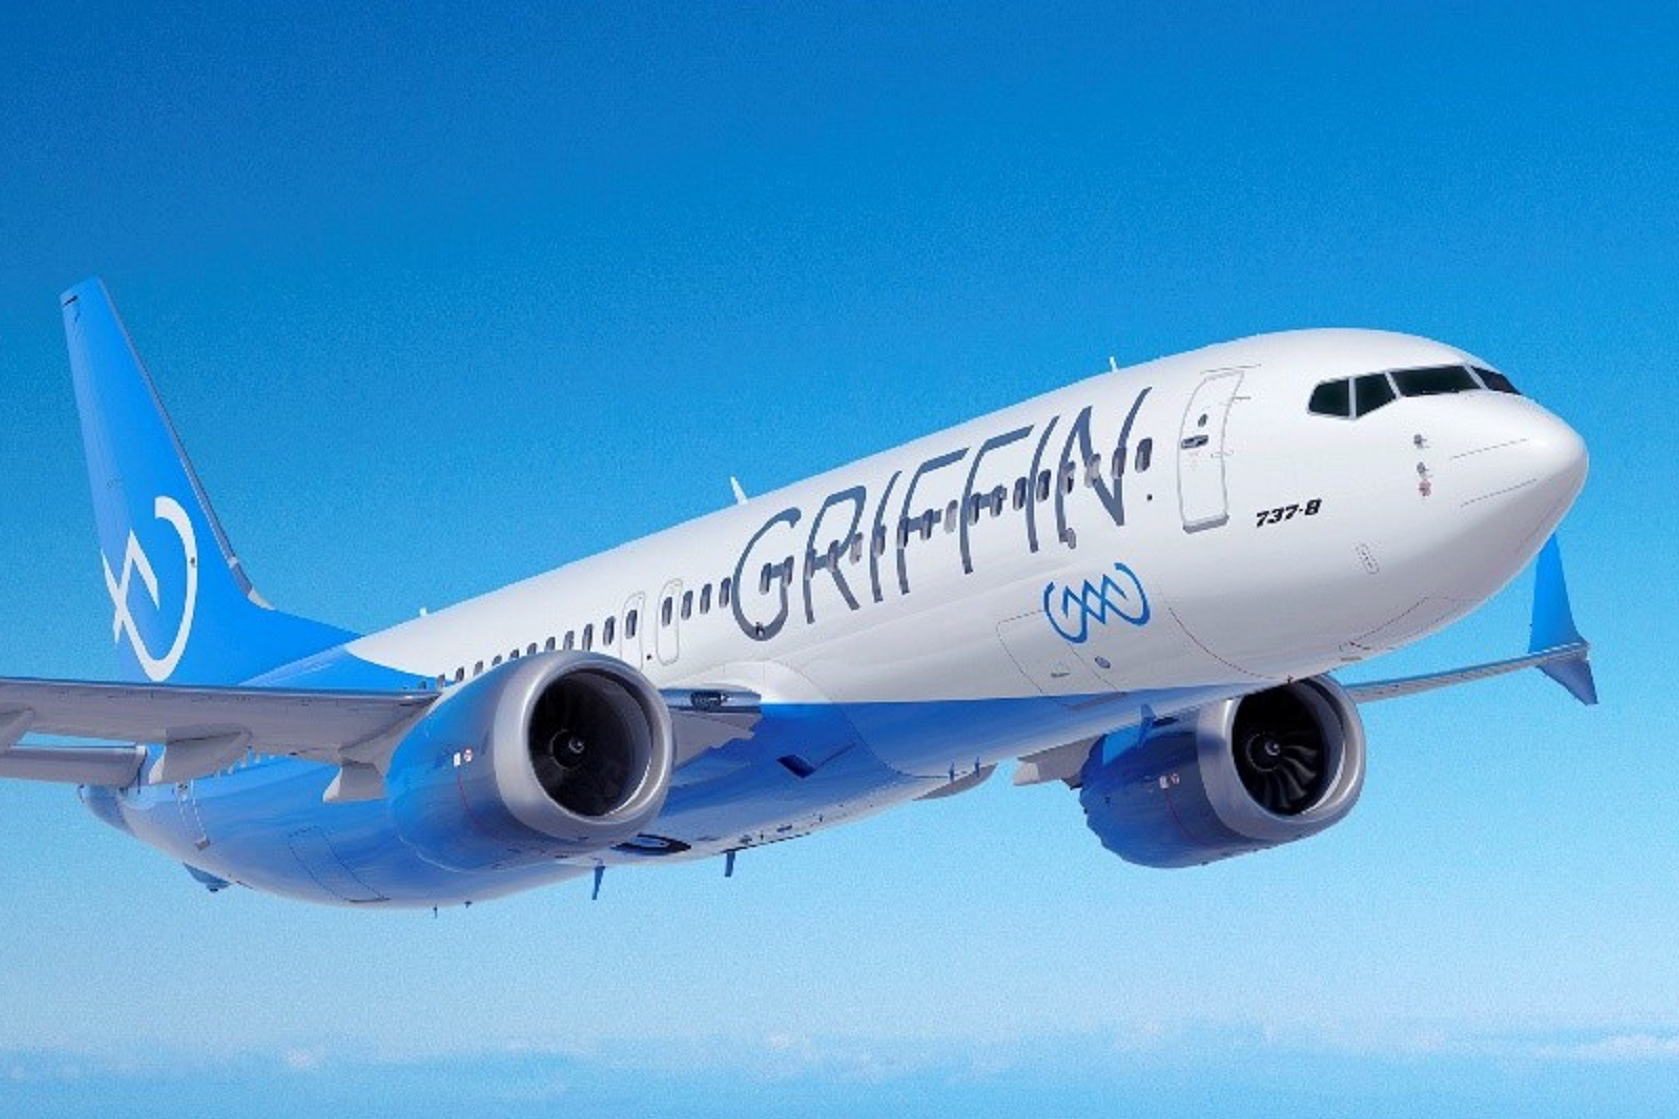 Griffin Global Asset Management has ordered 5 Boeing 737-8 jets. Click to enlarge.